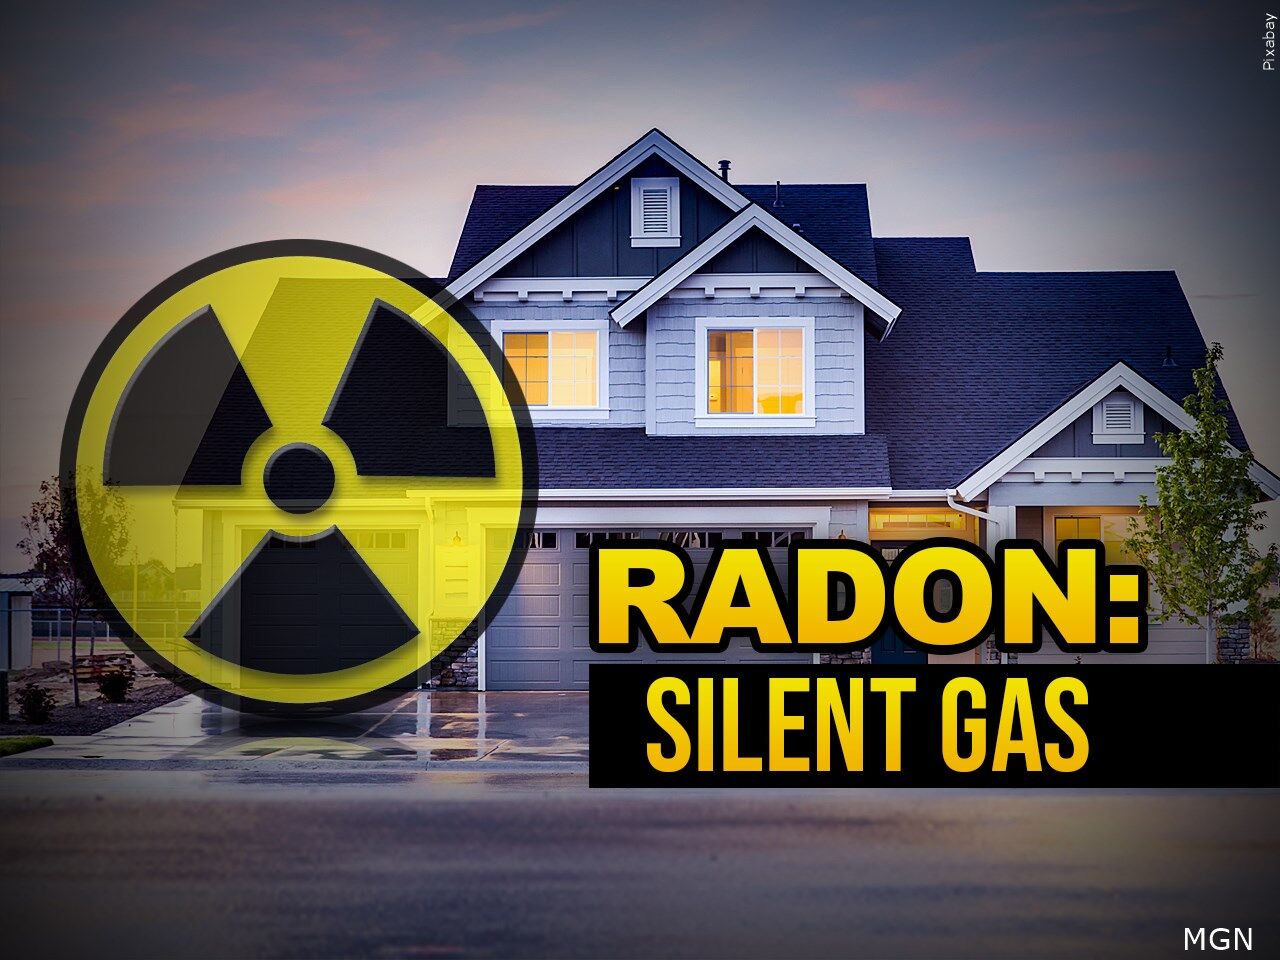 How to test for cancer-causing radon in your home this winter